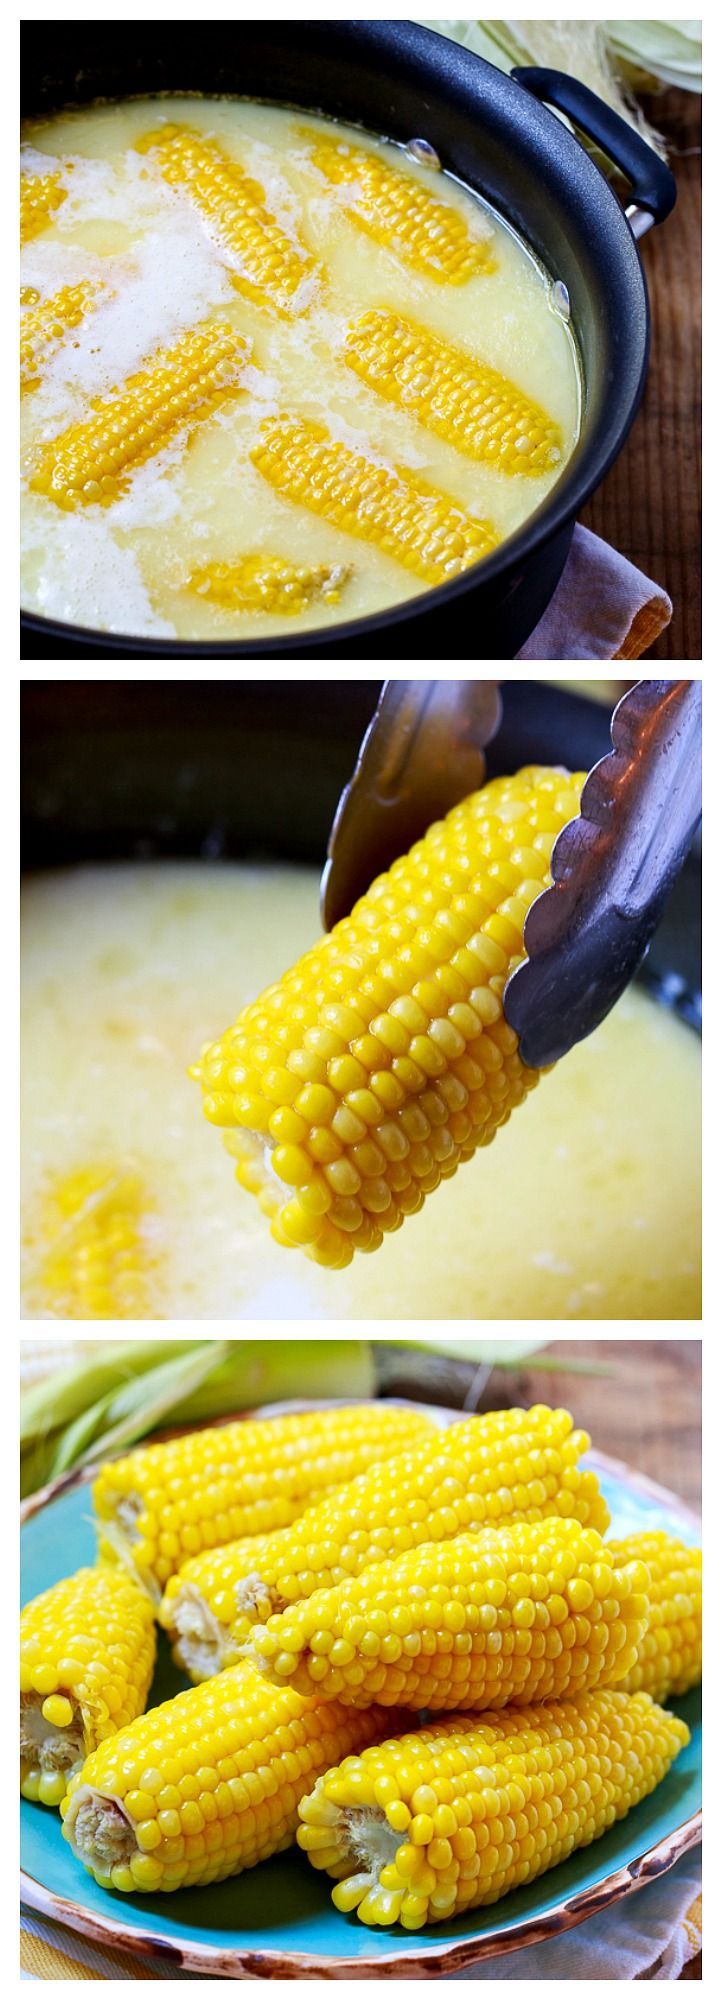 The best way to cook corn- in boiling water with a cup of milk and a stick of butter. So good!